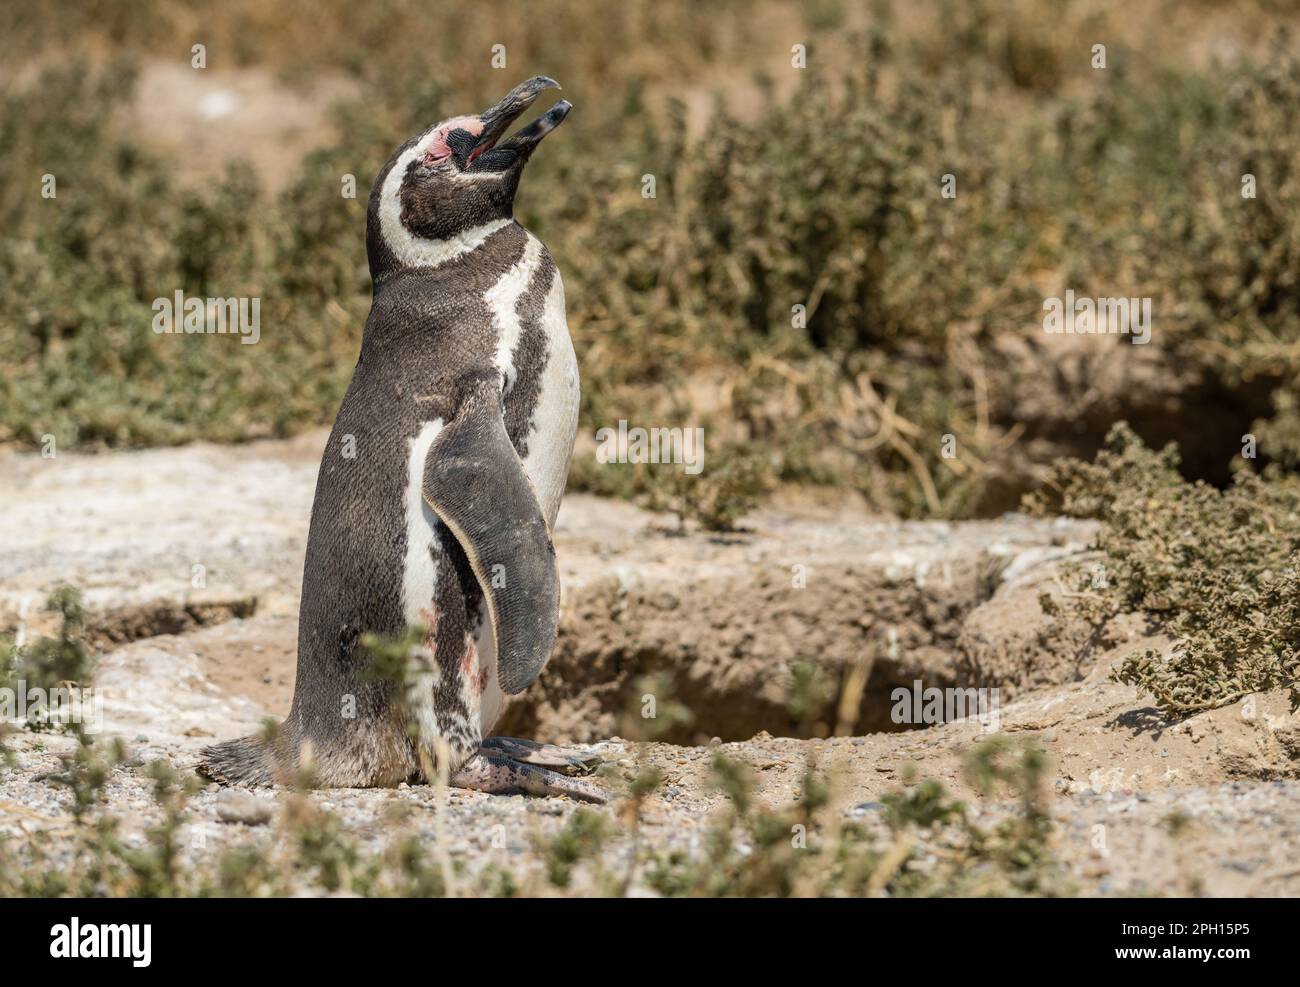 Magellanic penguin standing and making calling sound in Punta Tombo penguin sanctuary in Chubut province Stock Photo